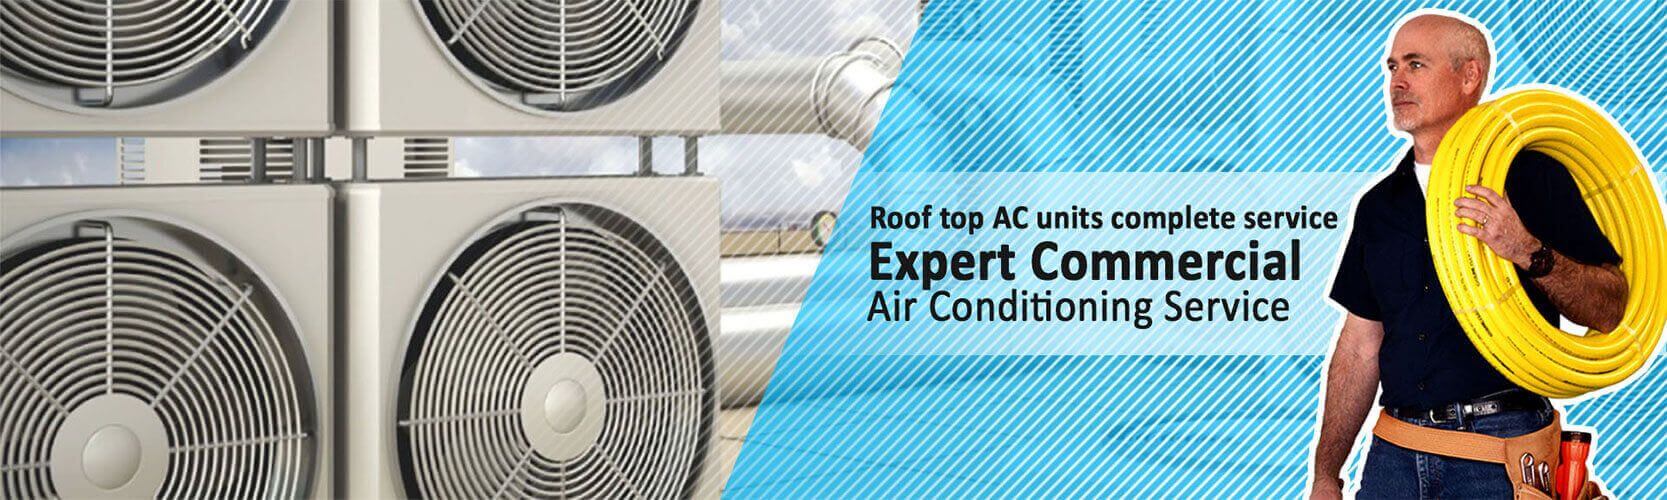 residential air conditioning service nj